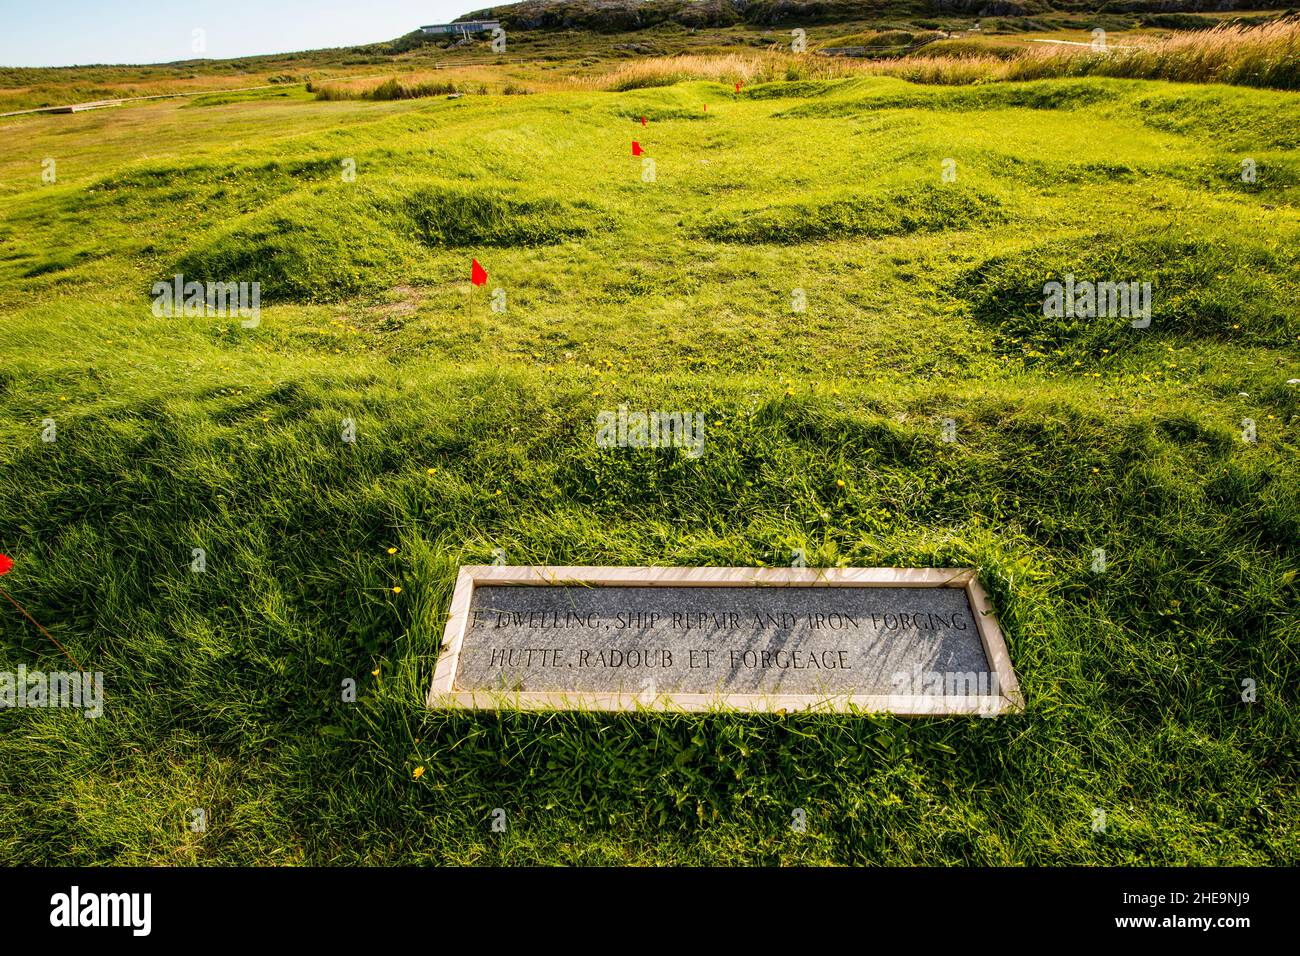 Remains of Viking long house at L'Anse aux Meadows National Historic Site, Great Northern Peninsula, Newfoundland, Canada. Stock Photo